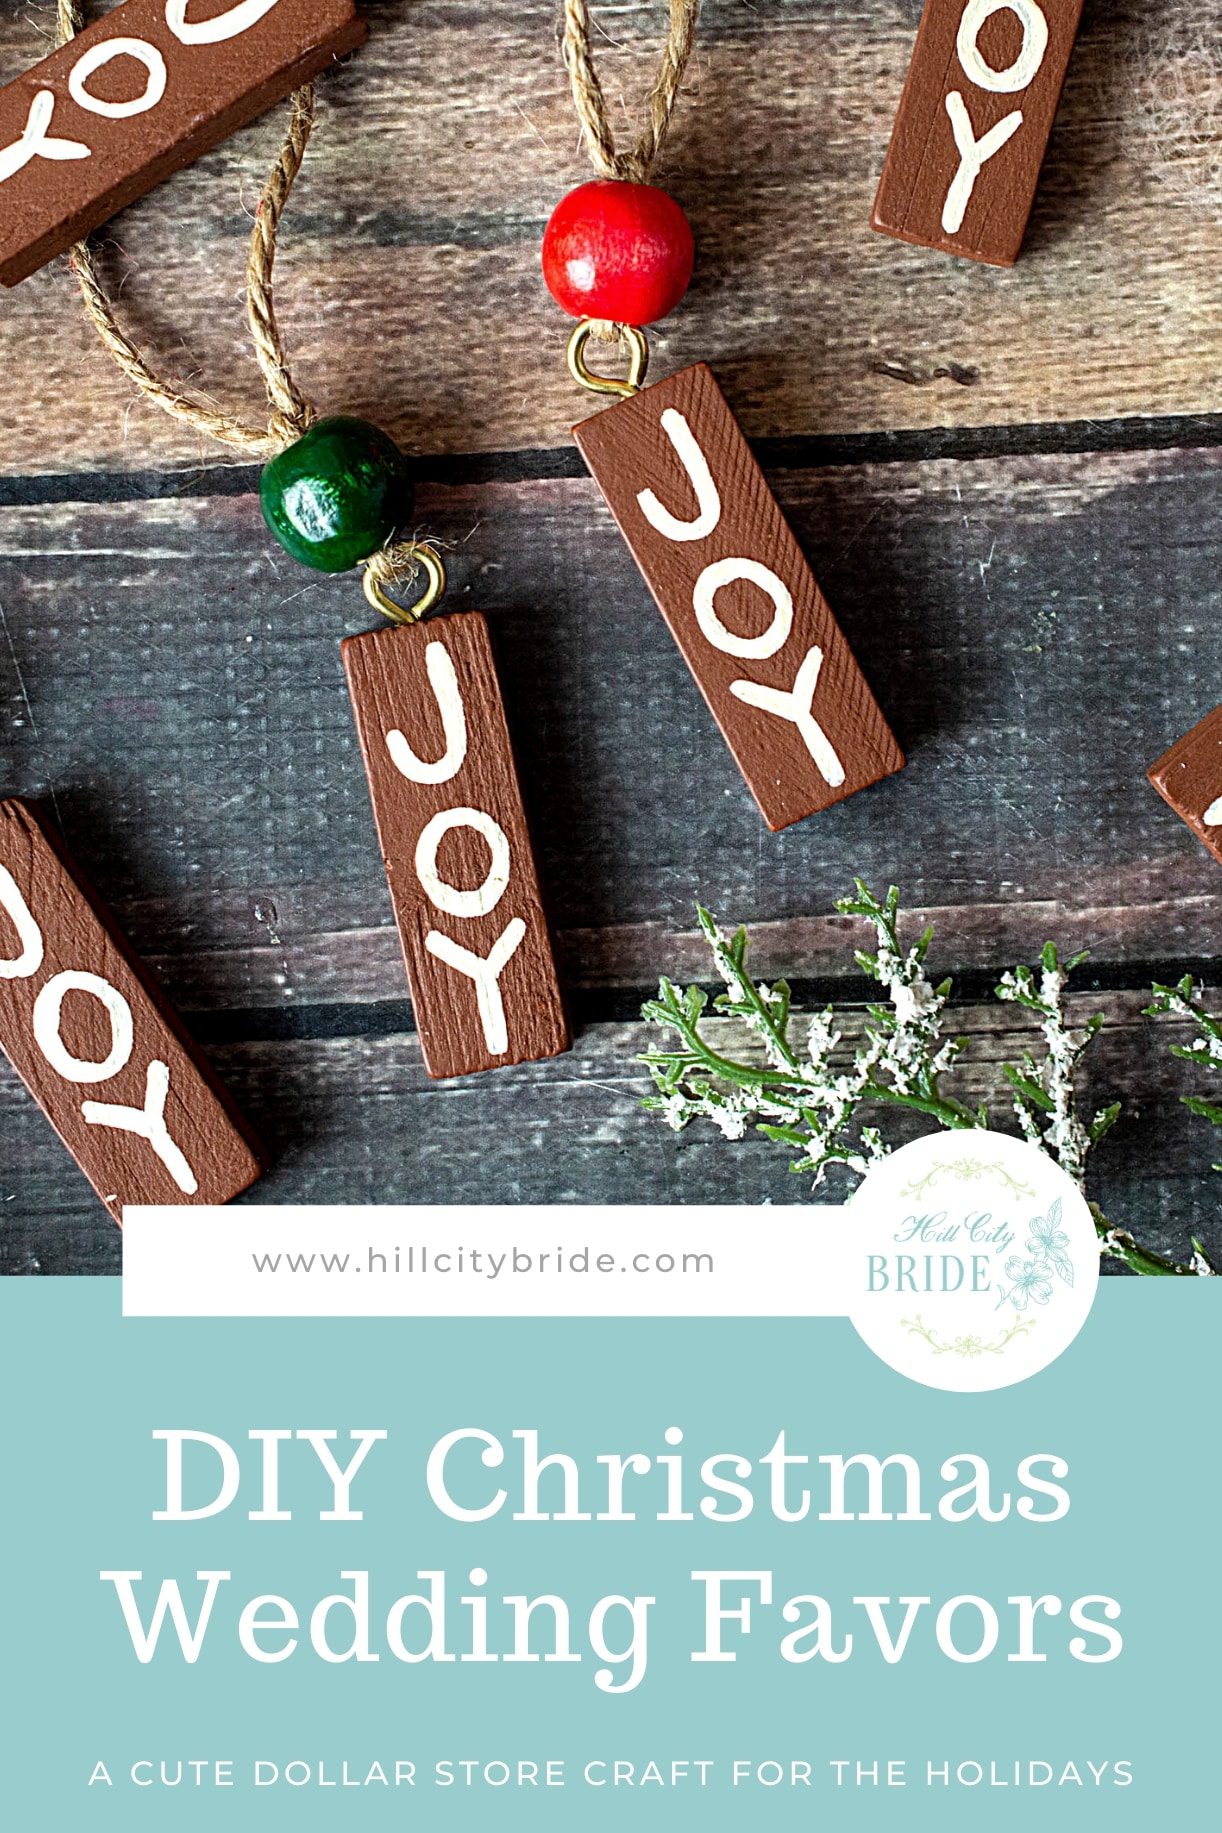 How to Make the Most Adorable DIY Christmas Wedding Favors Dollar Store Craft Ideas